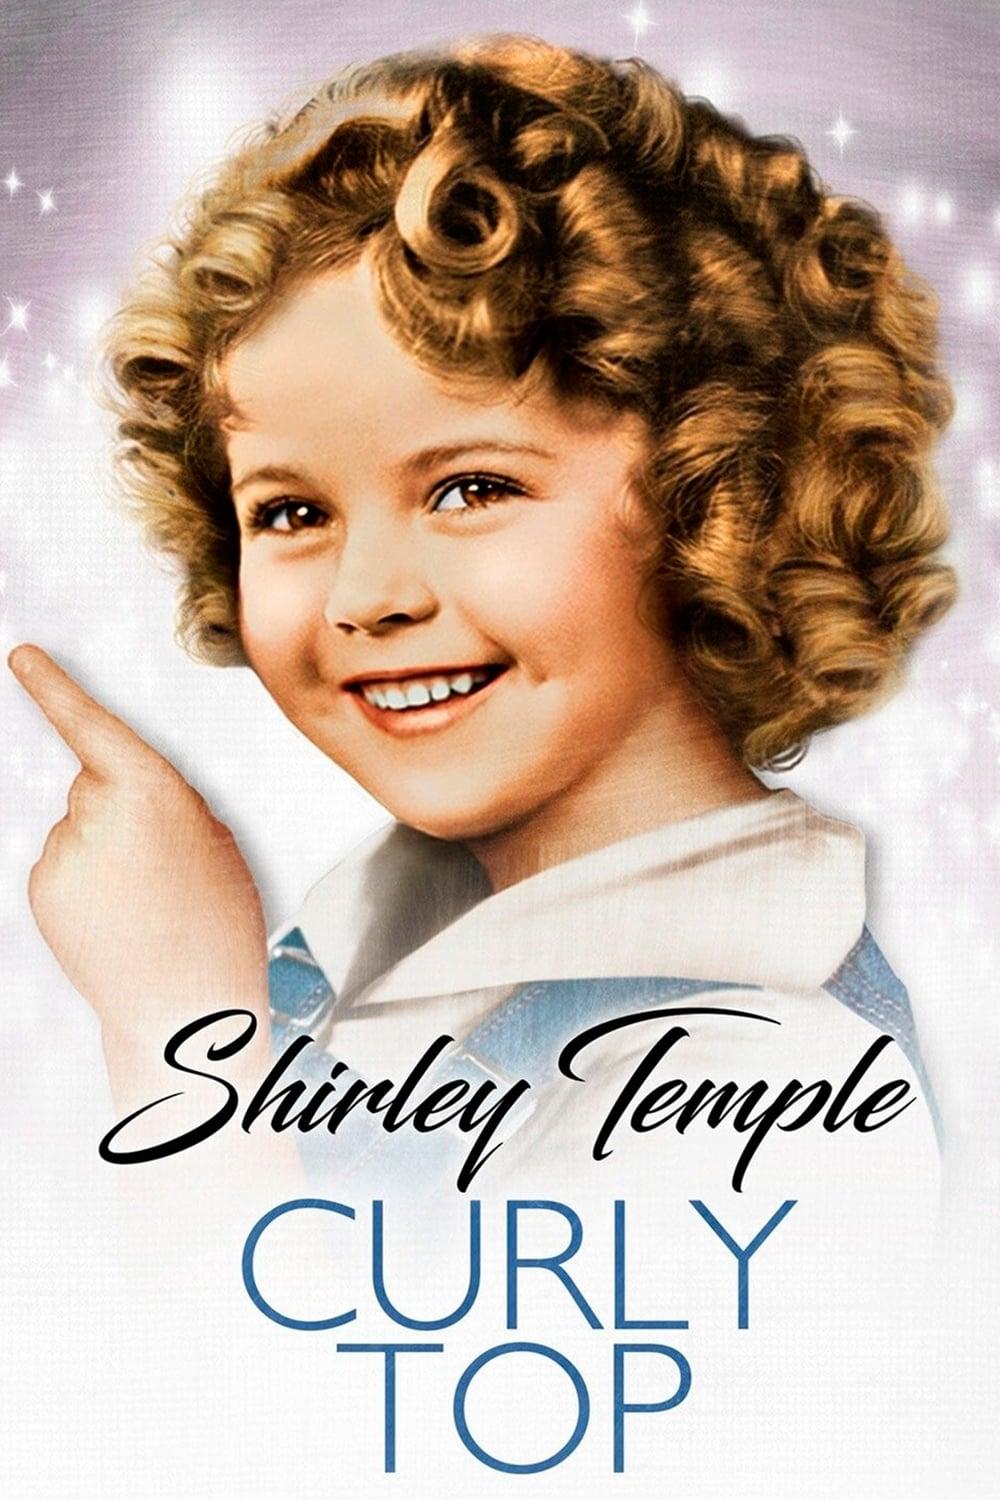 Curly Top poster